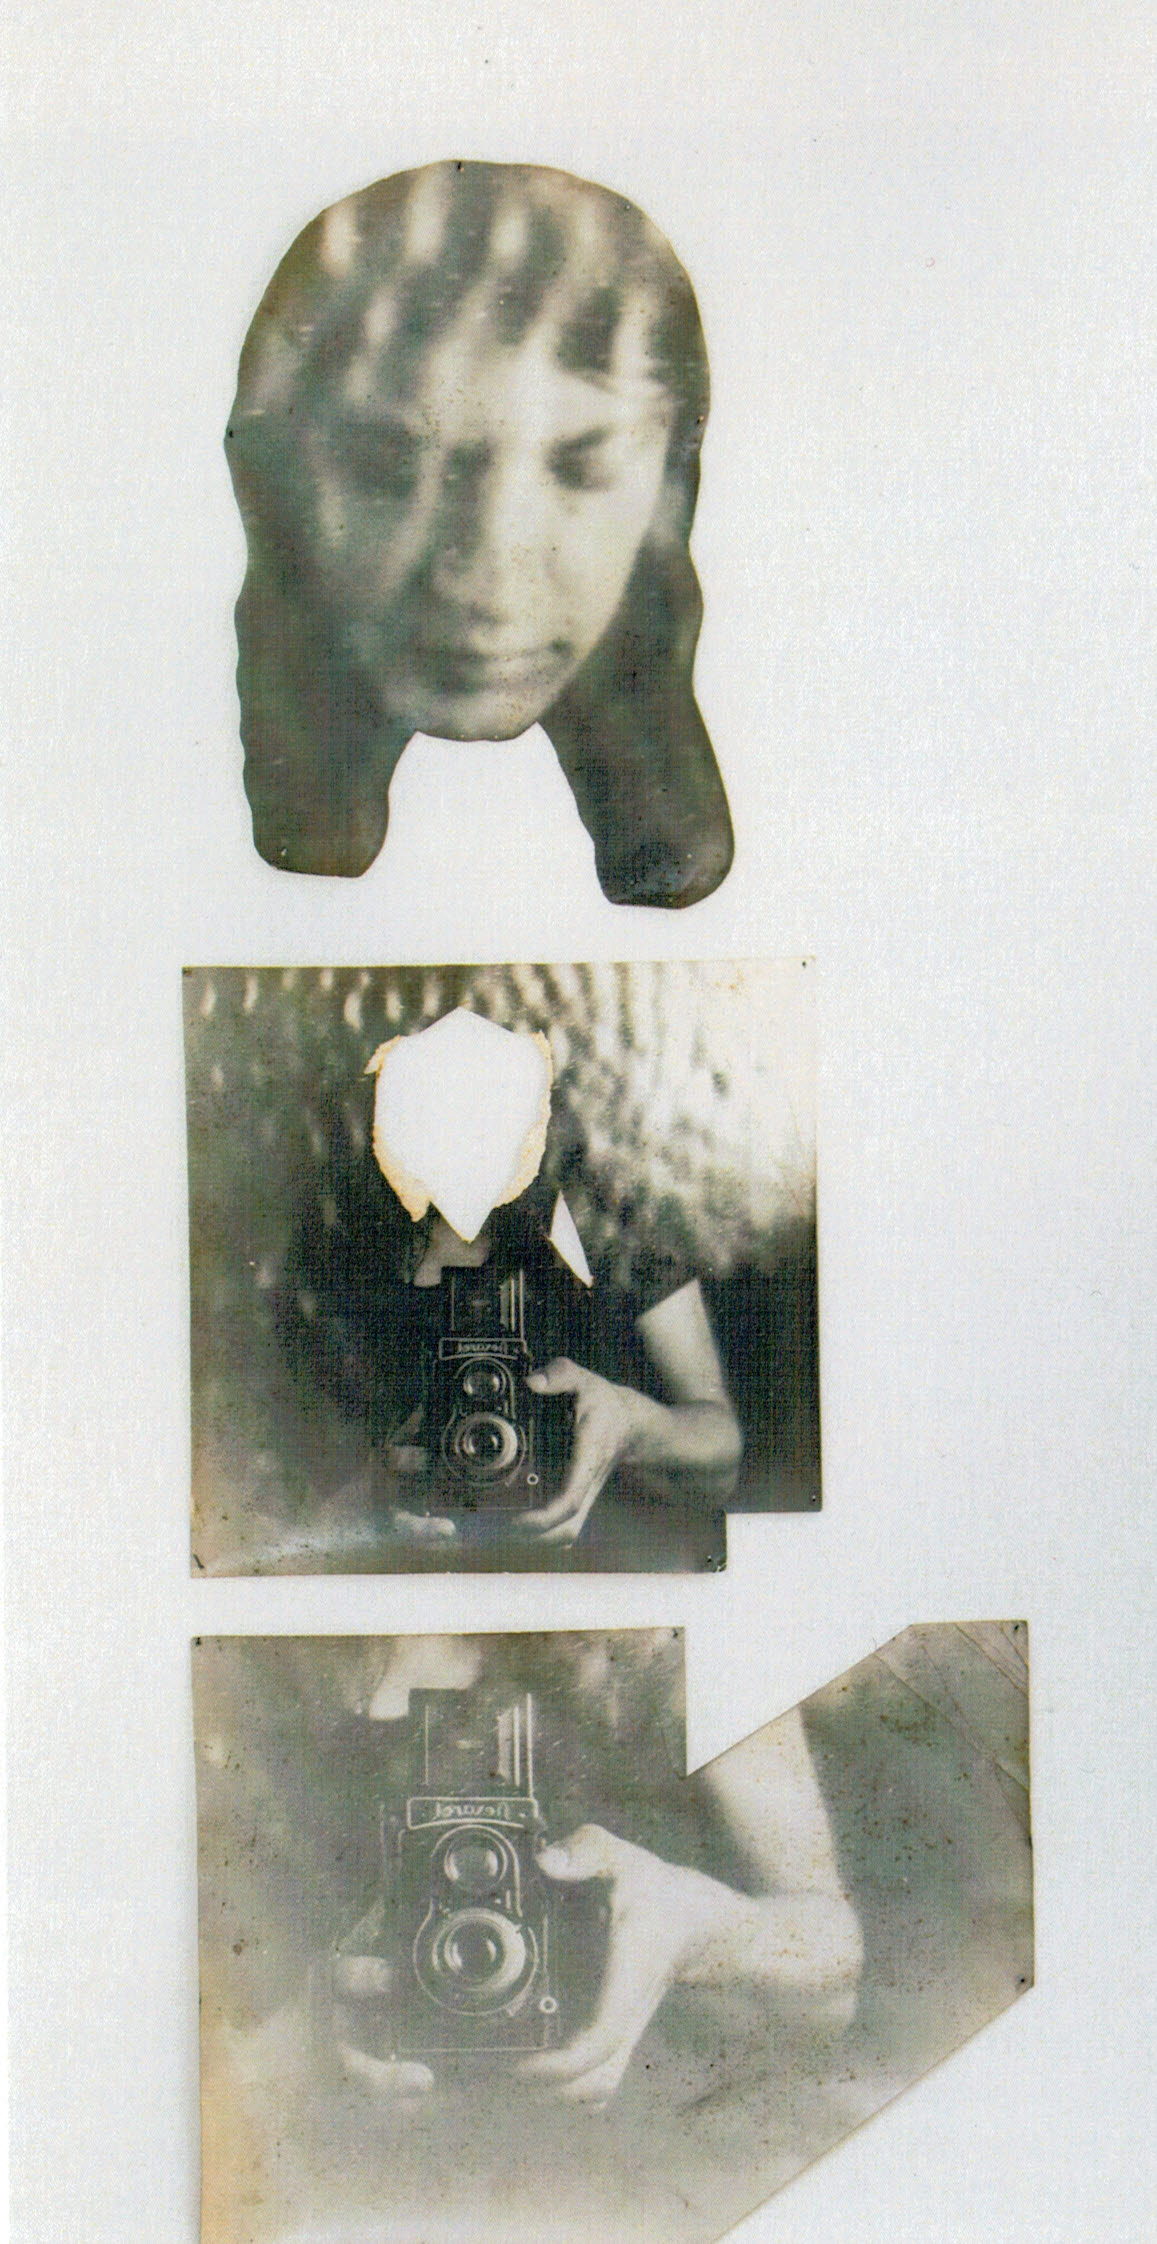 SELFPORTRAIT (1973) black and white photograph on cardboard